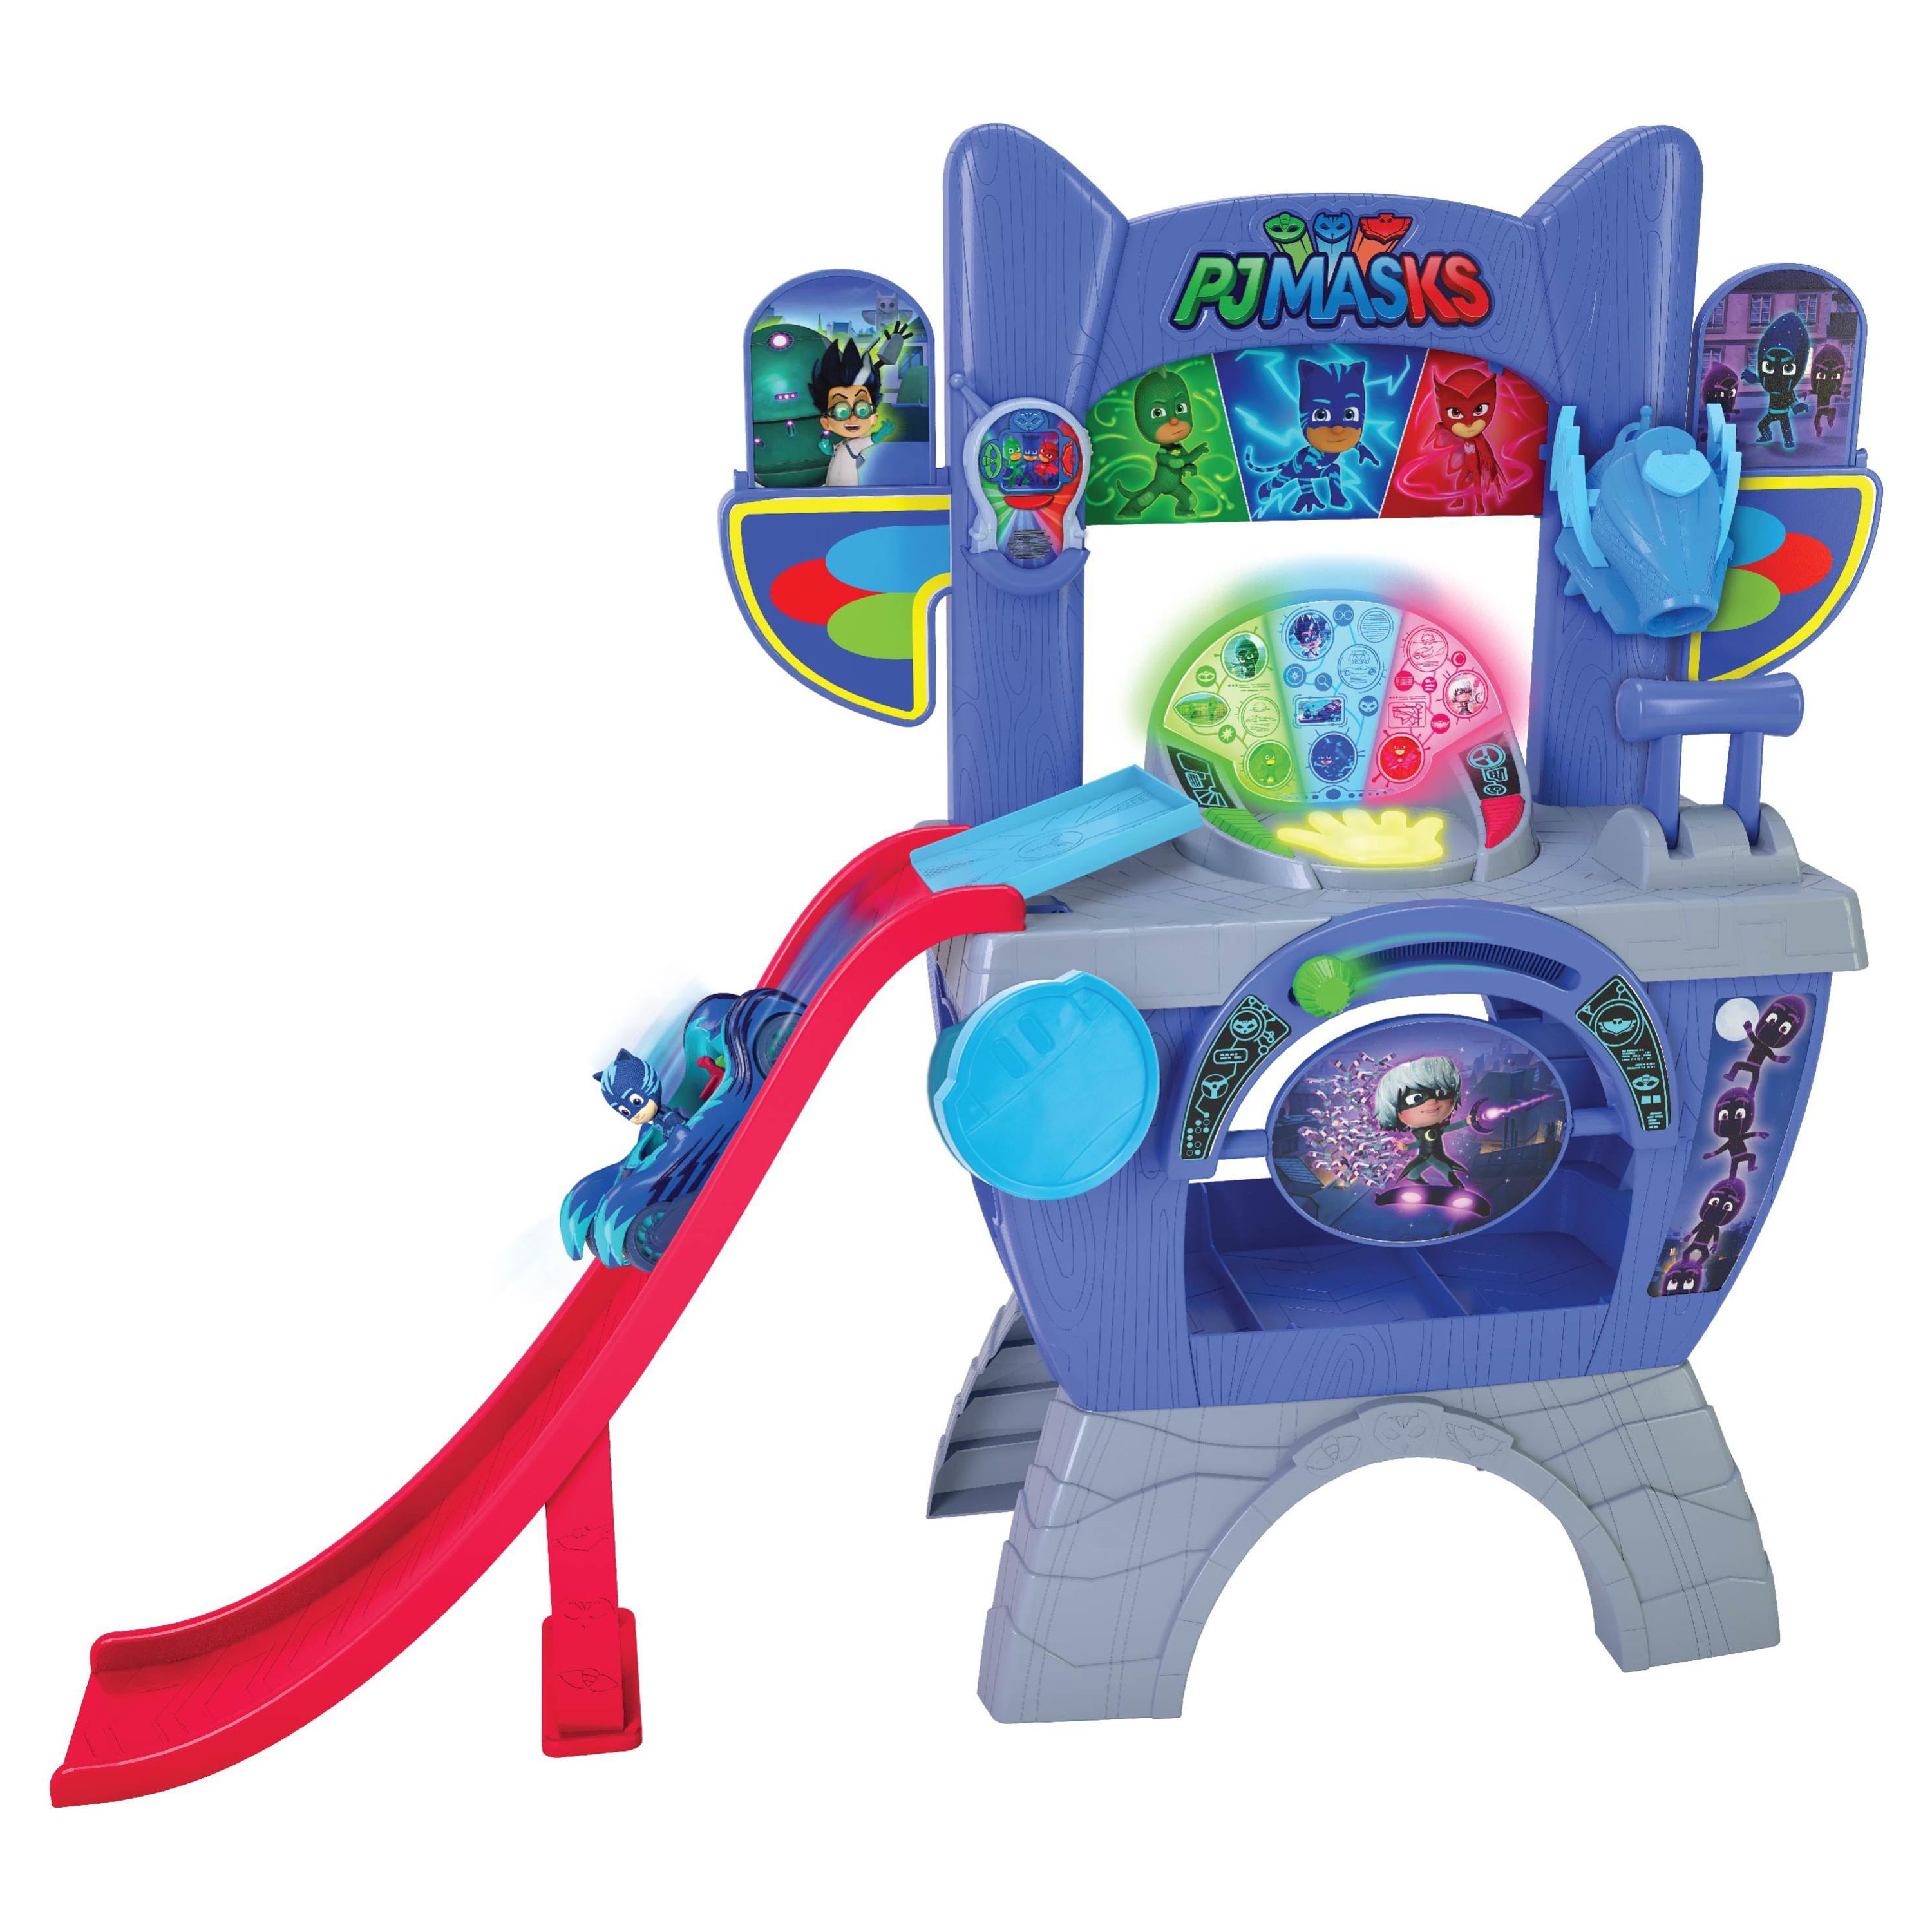 PJ Masks Saves the Day HQ 36-Inch Tall Interactive Playset with Lights and Sounds,  Kids Toys for Ages 3 Up, Gifts and Presents - image 4 of 9